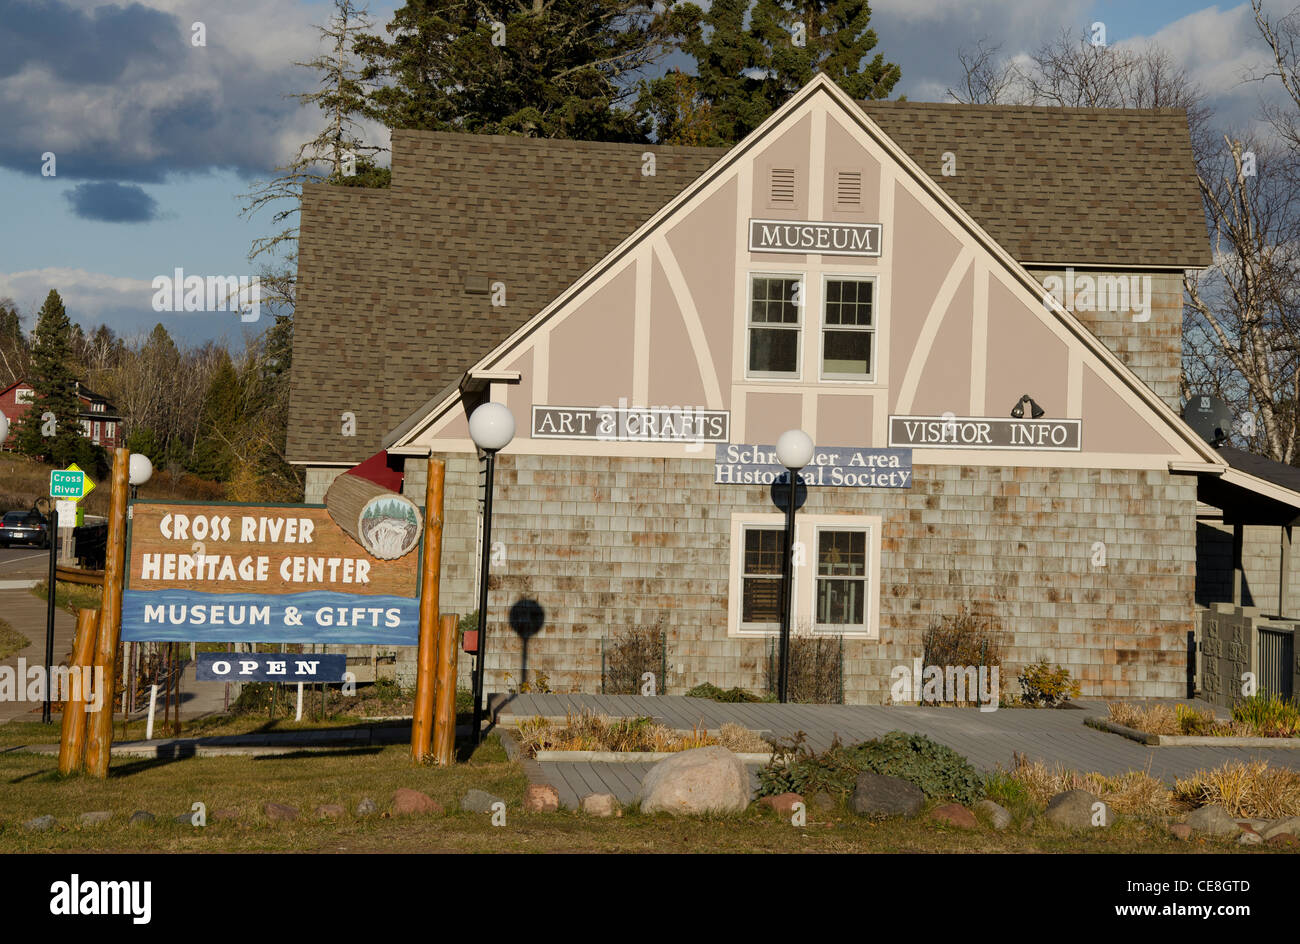 The Cross River Heritage Center in Schroeder, Minnesota Stock Photo